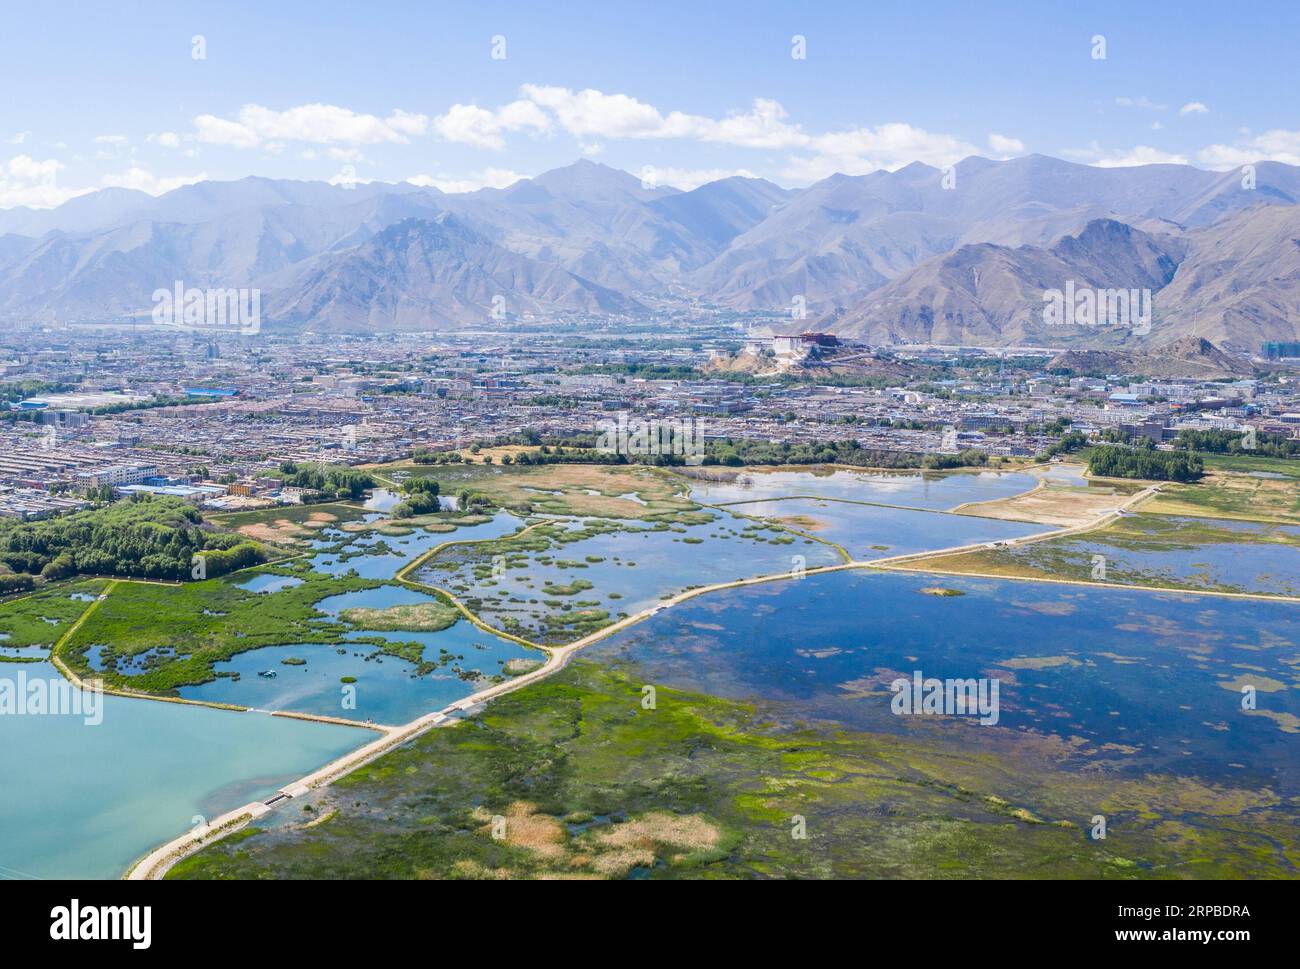 (190606) -- LHASA, June 6, 2019 (Xinhua) -- Photo taken on June 5, 2019 shows a view of Lhalu Wetland National Nature Reserve in Lhasa, southwest China s Tibet Autonomous Region. Monitoring data provided by Chinese Academy of Sciences and departments on environmental protection shows that Tibet maintains a stable ecological structure in terms of its air, sound, water, soil, radiation level and ecological environment. With most areas remaining their original states in ecology, Tibet is one of the regions with best ecological conditions in the world. So far Tibet has established a well-distribut Stock Photo